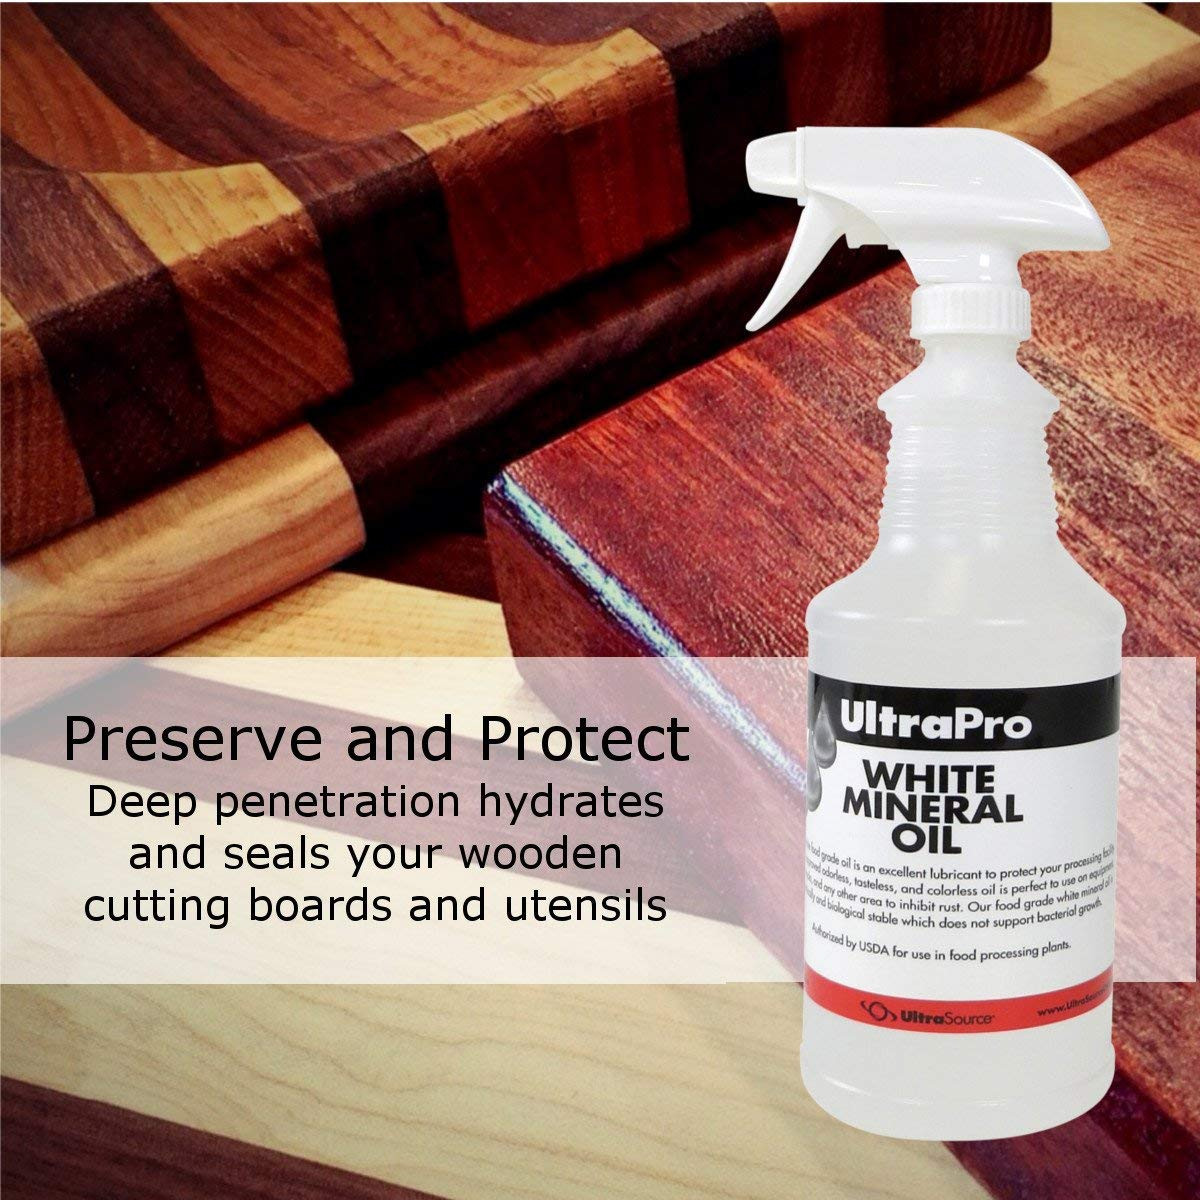 20 Perfect How to Fix Loose Hardwood Floor Boards 2024 free download how to fix loose hardwood floor boards of amazon com 32 oz spray bottle food grade mineral oil for inside spray bottle food grade mineral oil for stainless steel cutting boards and butcher b